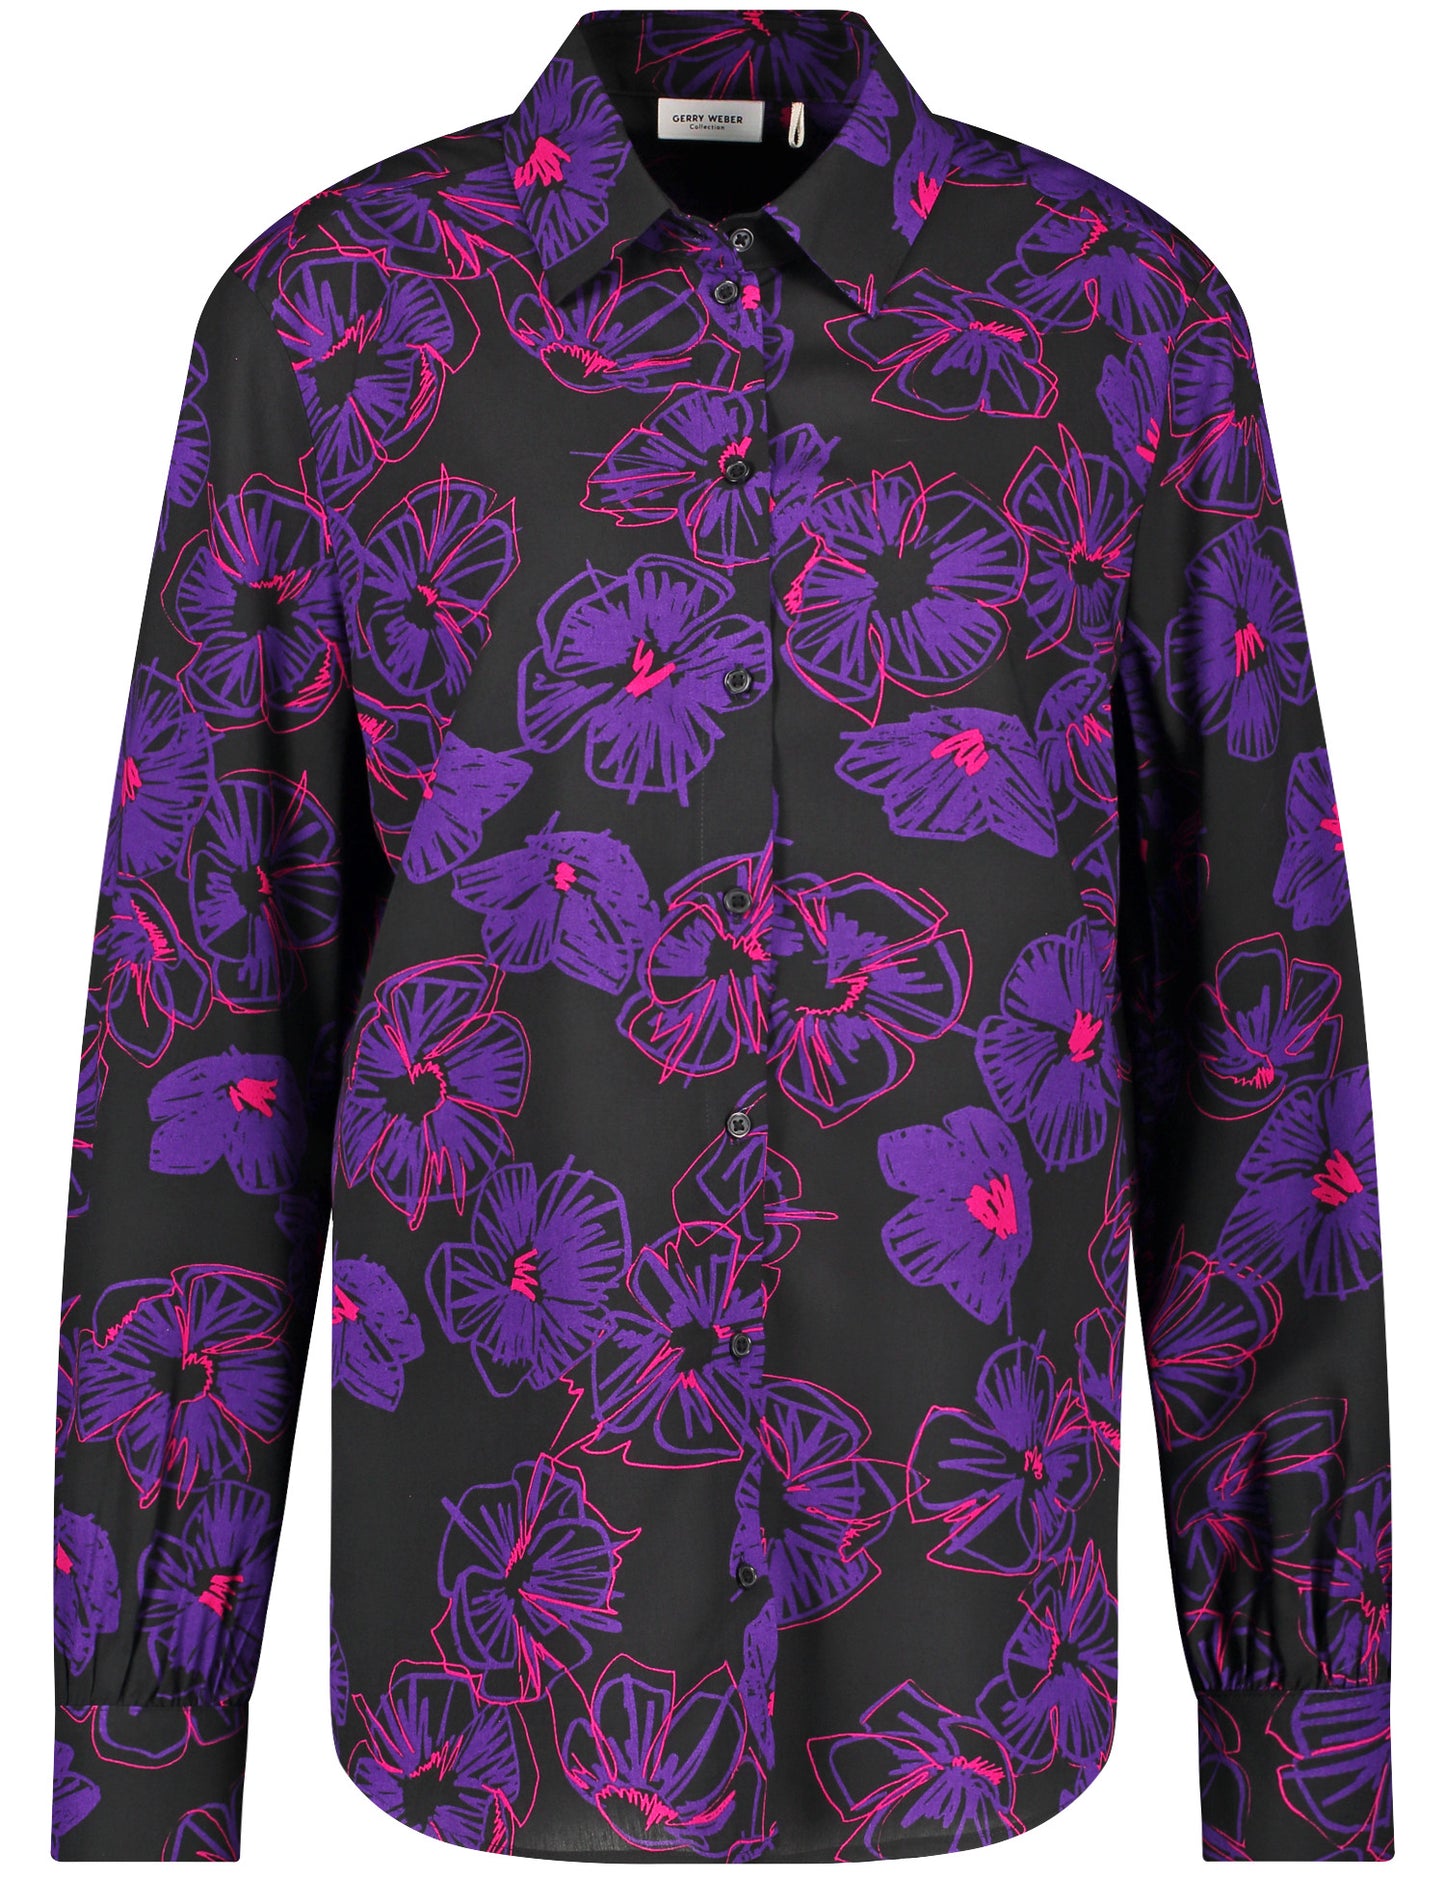 Long-sleeved blouse with a floral pattern